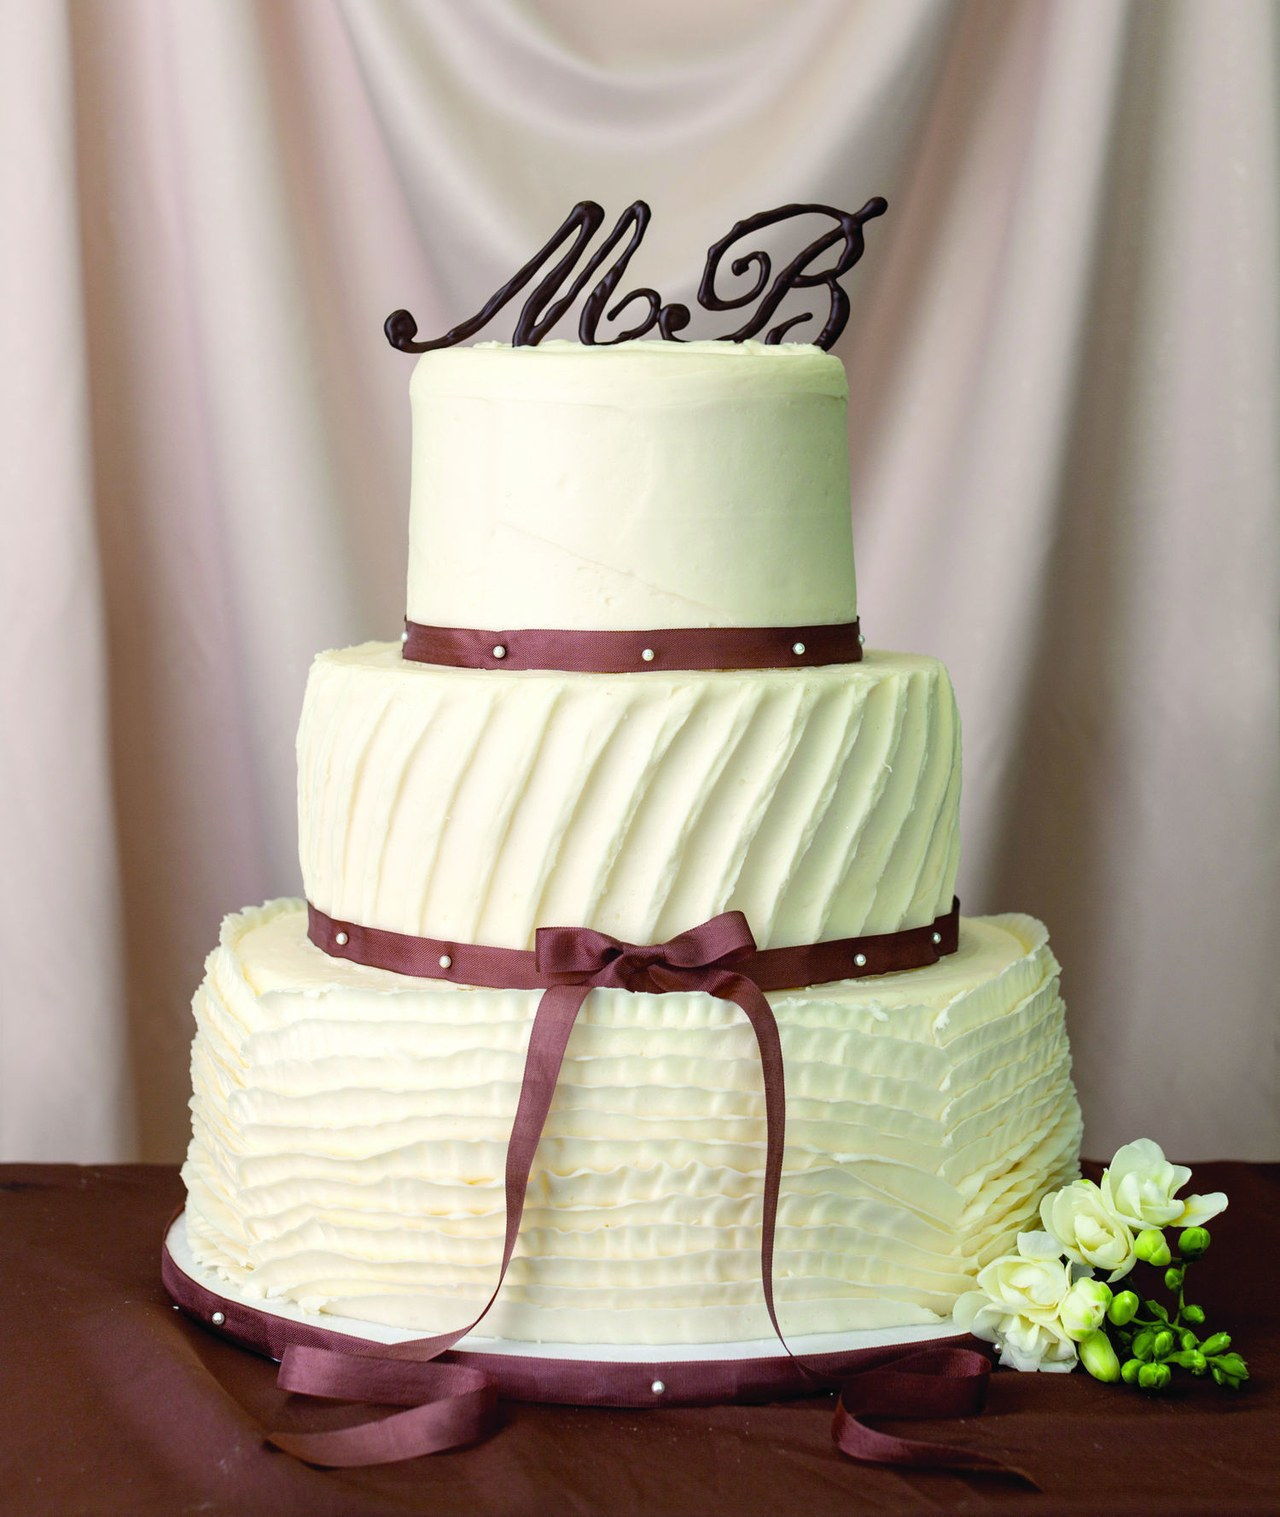 3 pictures of wedding cakes magnolia bakery 0328